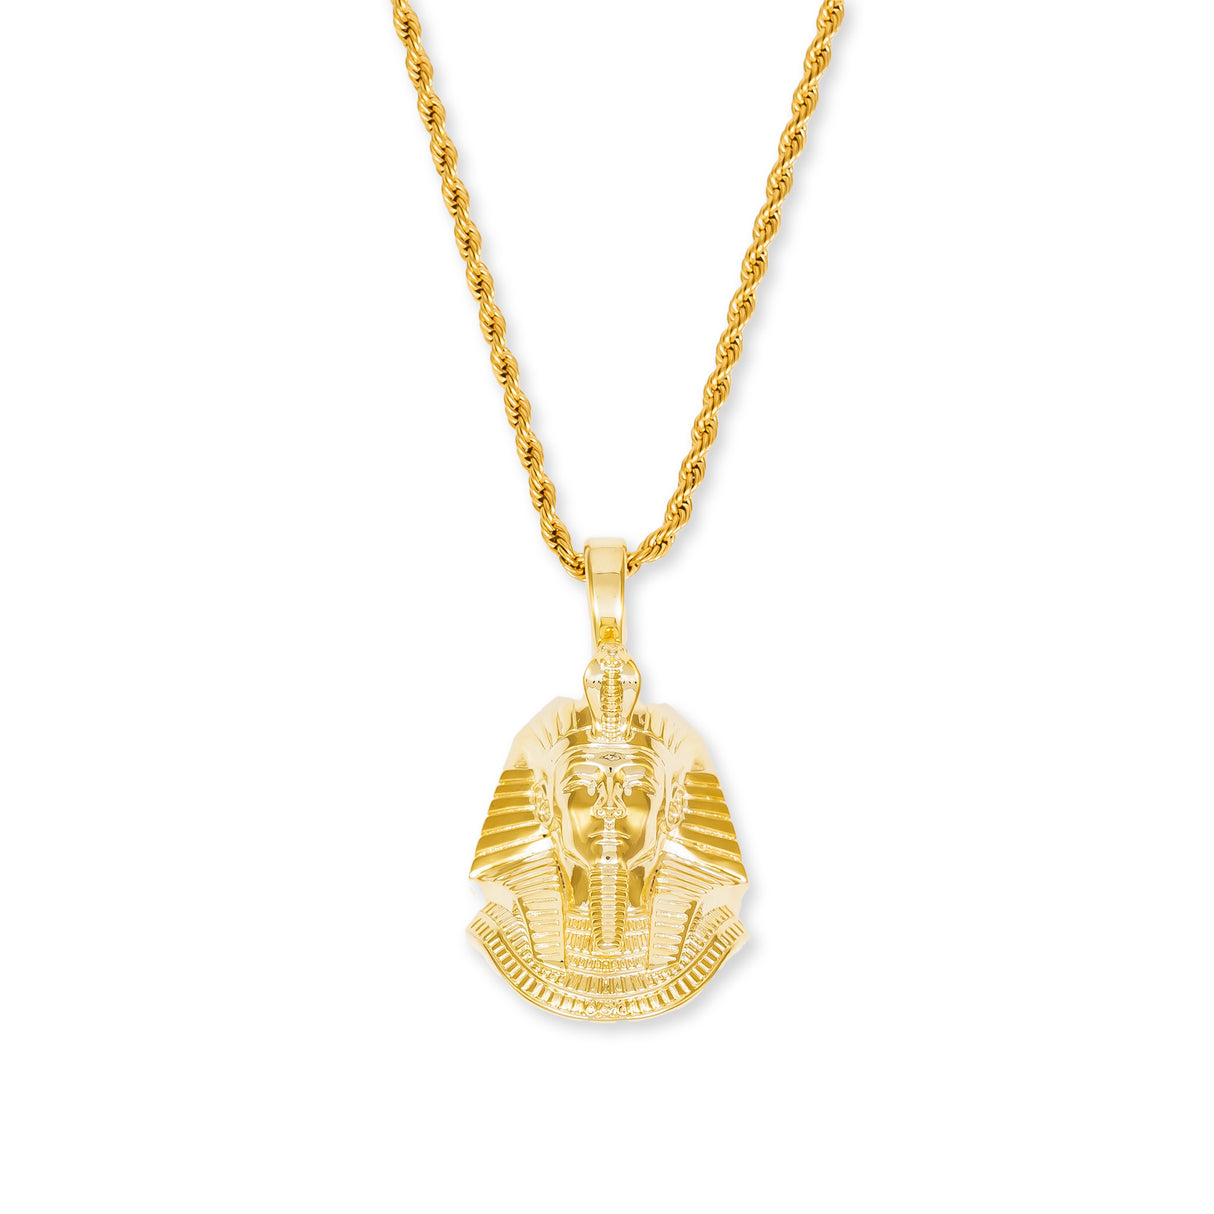 Pharaoh Head V2 Necklace Pendant & Rope Chain The Gold Gods Men's Jewelry